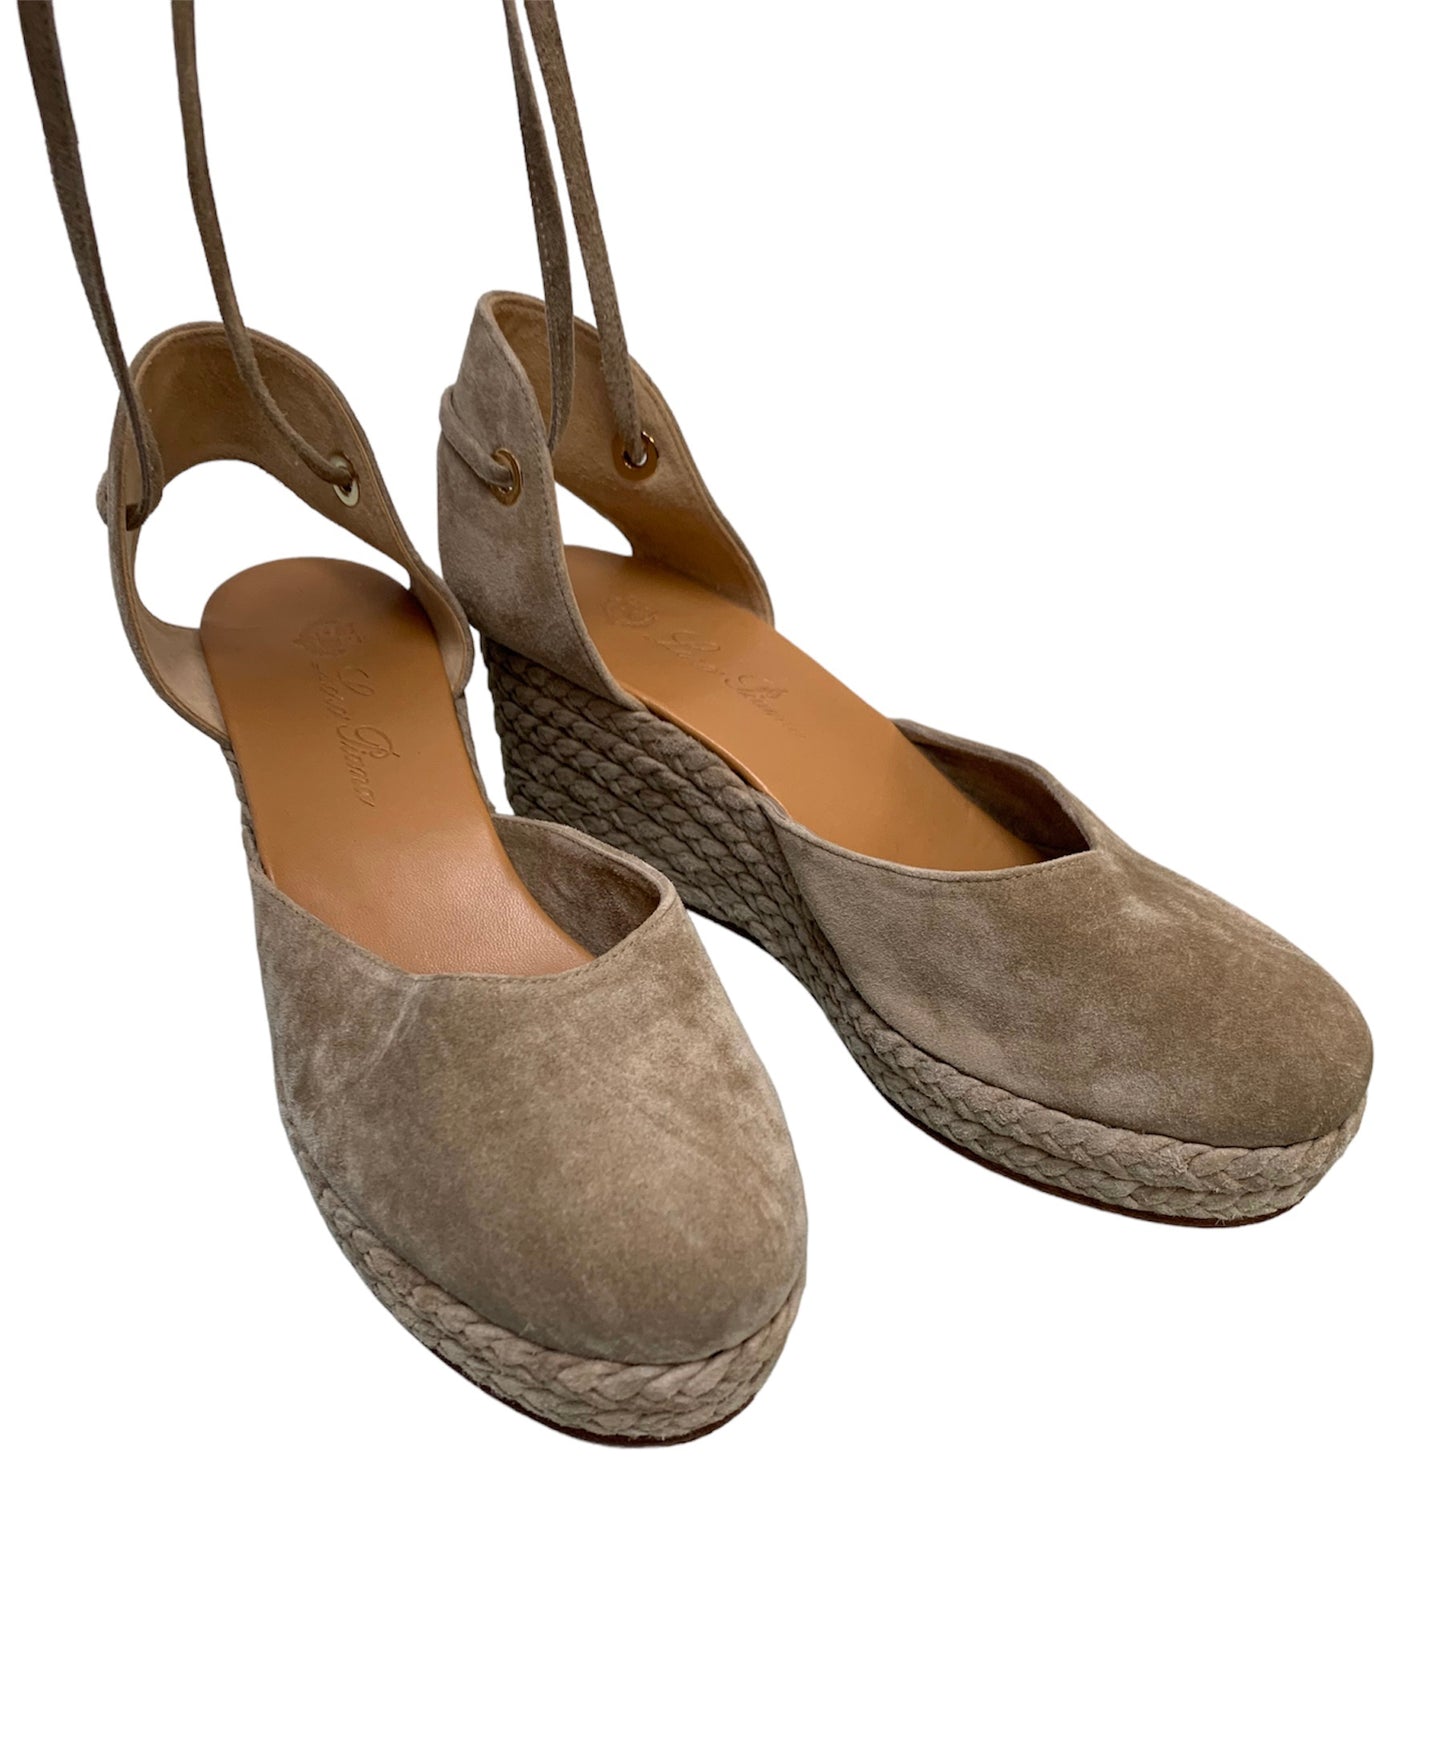 Loro Piana Women's Taupe Suede Wedges-New